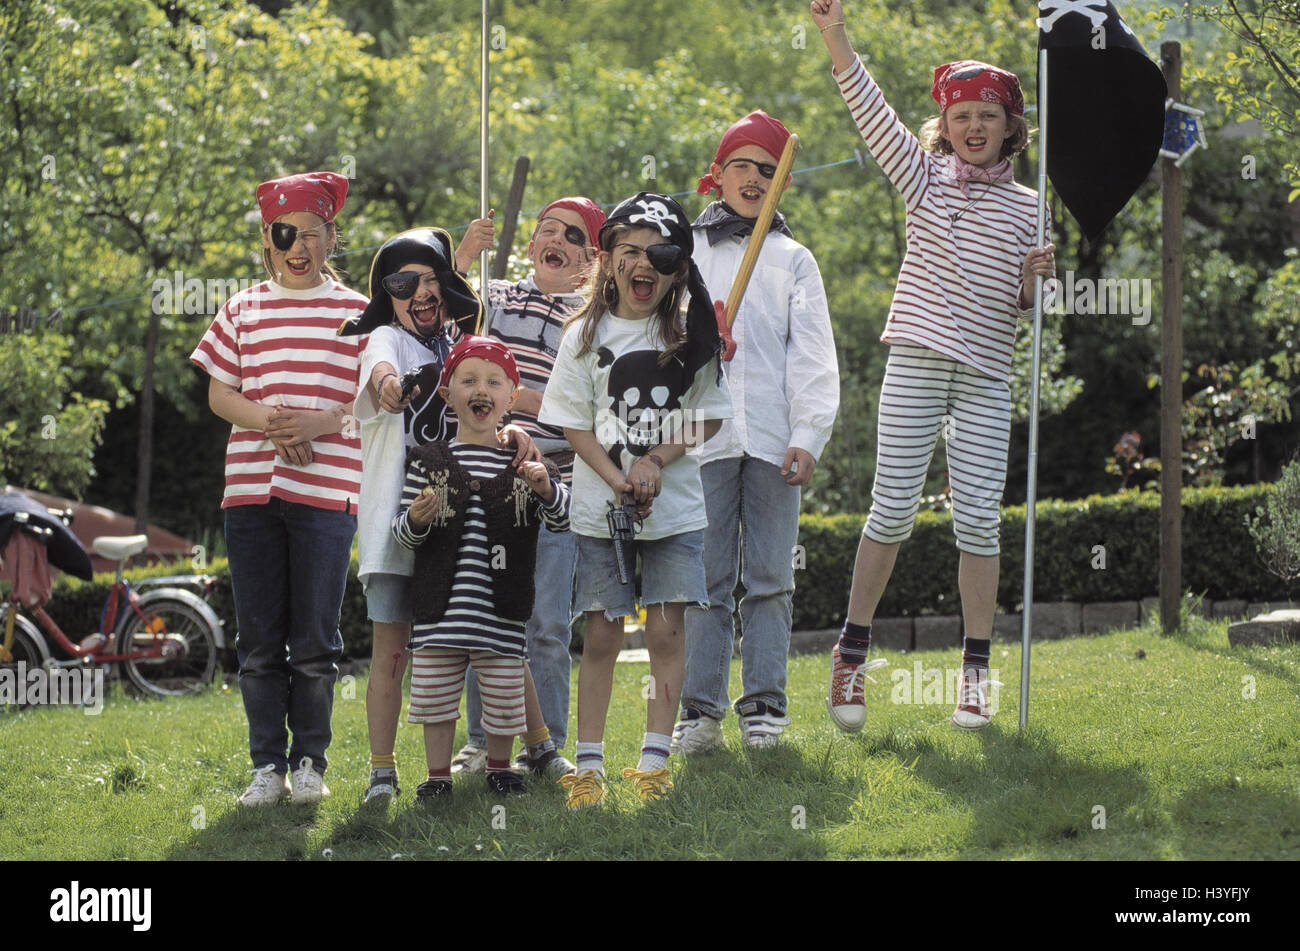 Garden, children, pirate's lining, melted, outside, meadow, girl, boy, 5 - 9 years, siblings, friends, leisure time, childhood, panel, lining, pirate, game, play, role play, exuberance, fun, six, happy, rejoice, cheering, group picture Stock Photo